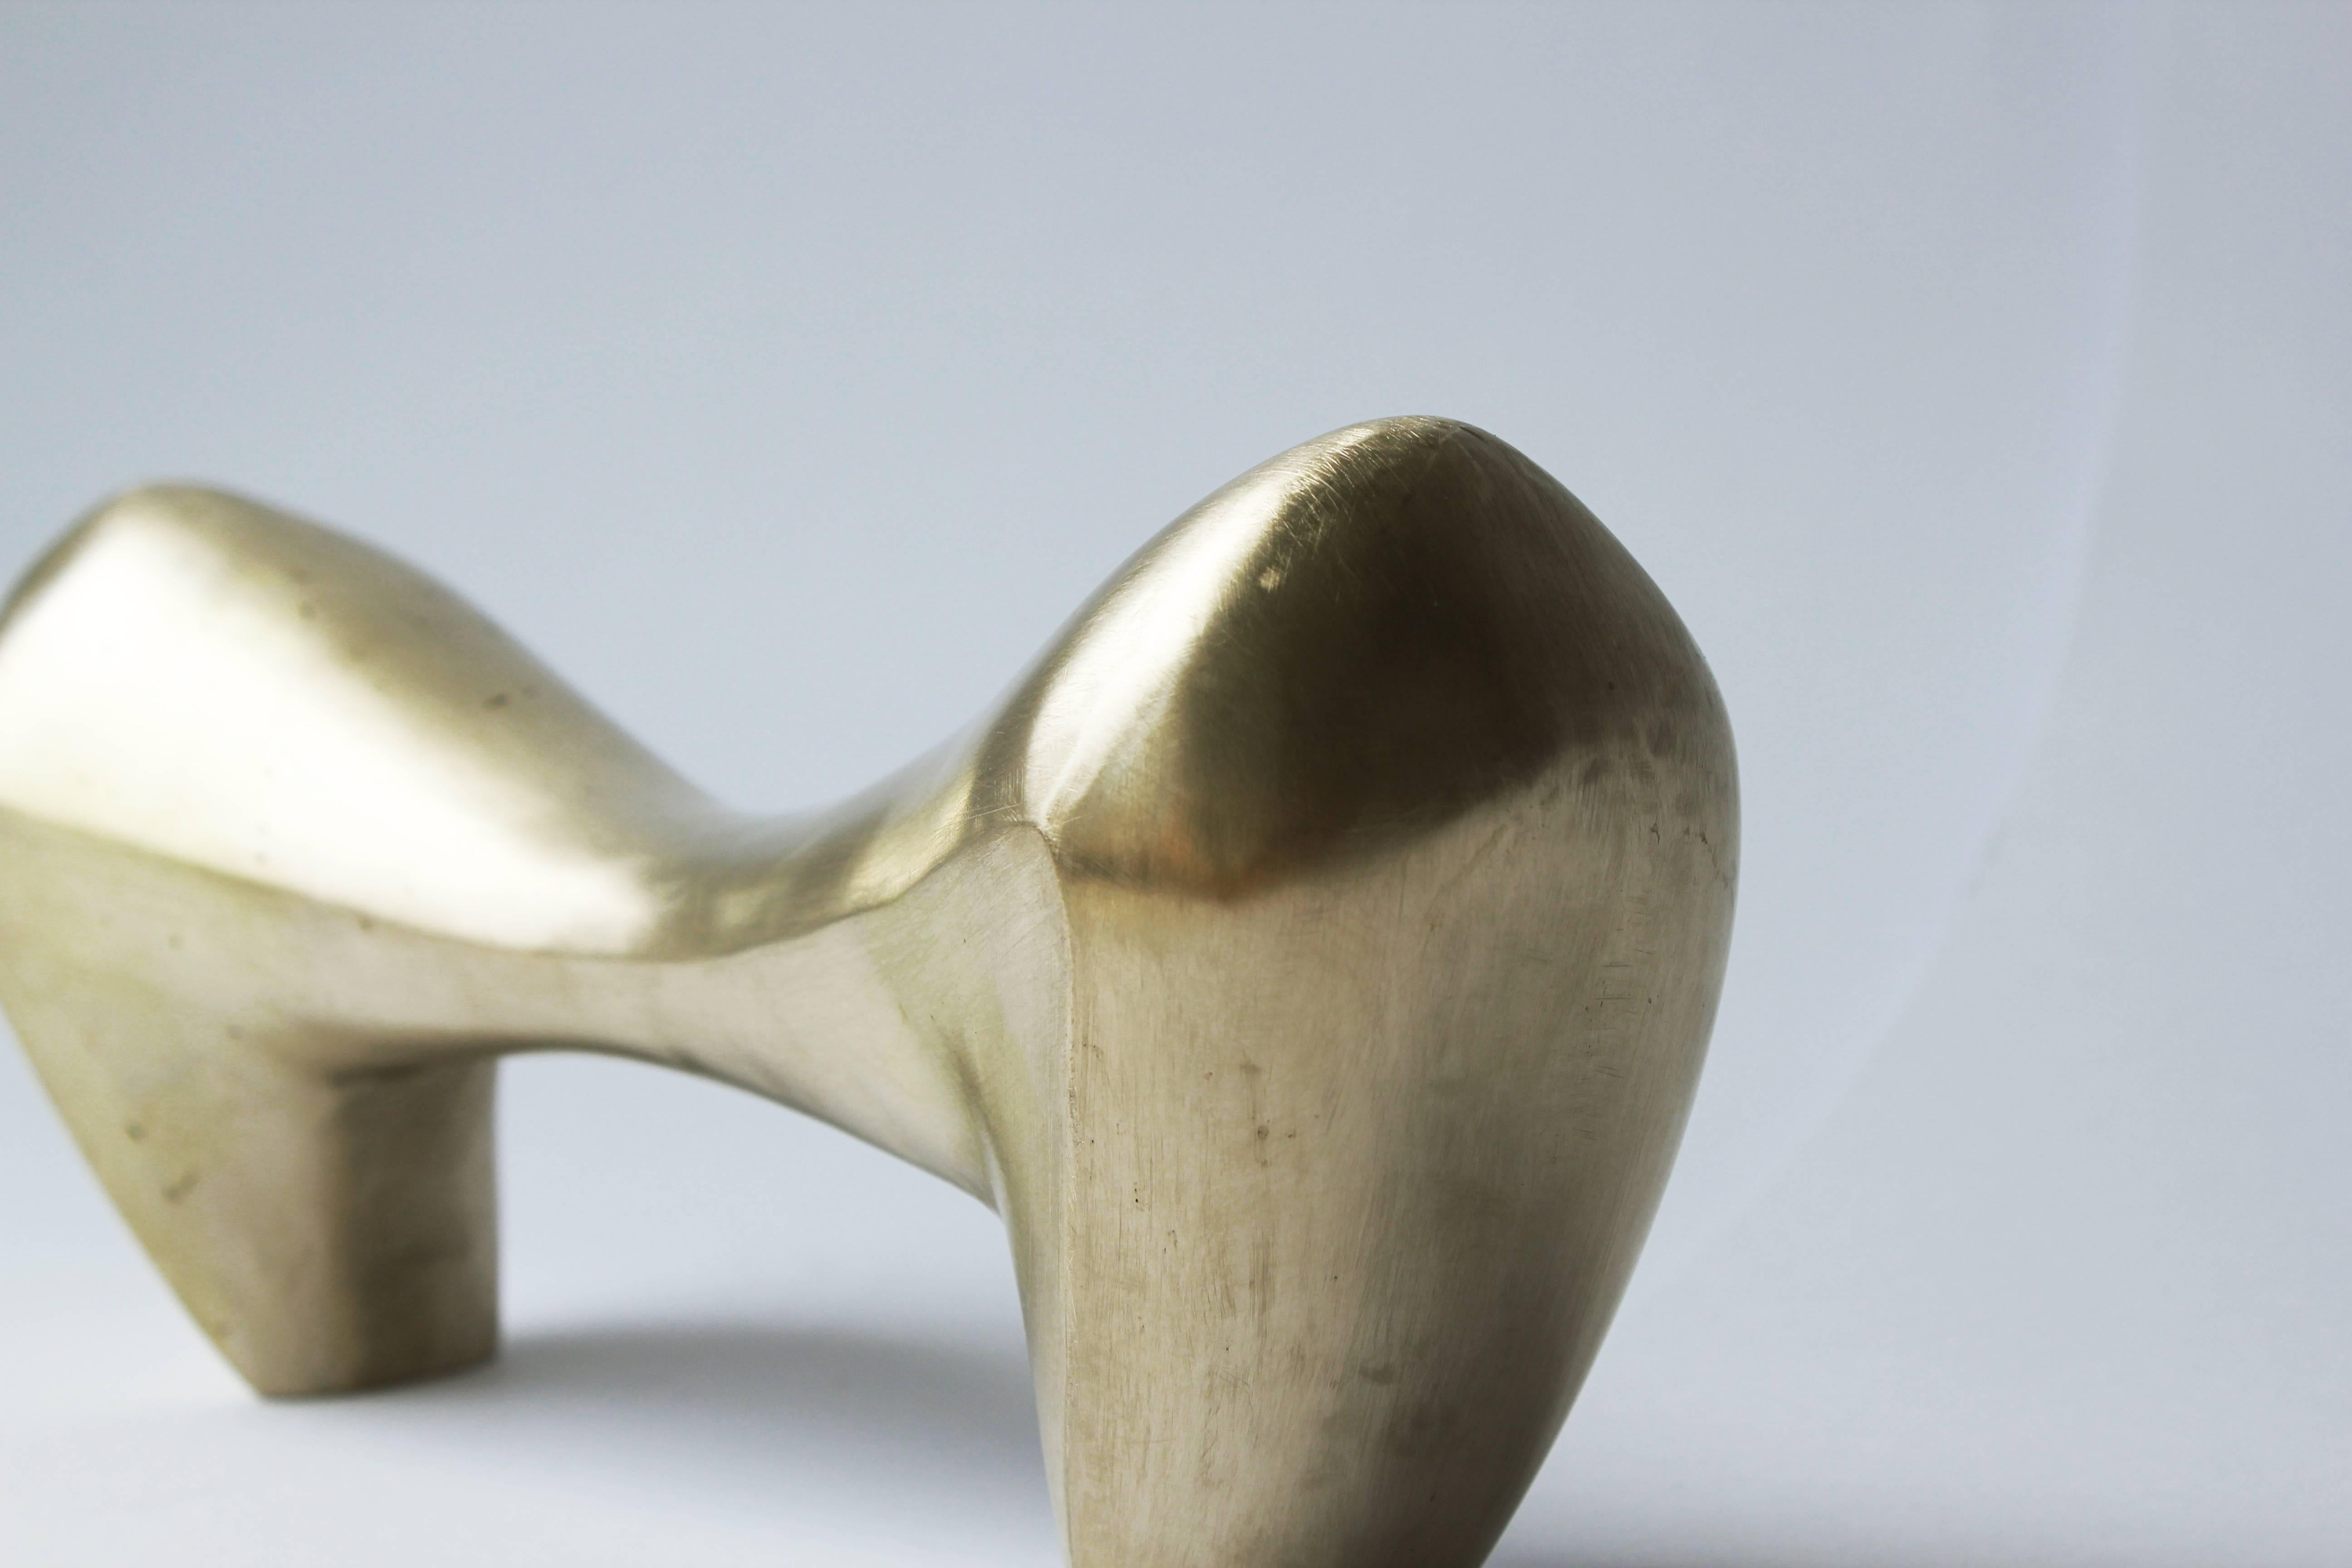 Pair of Solid Brass Weights by A. Krzyżanowska, Editions Philolux, 2016 In Excellent Condition For Sale In Chicago, IL